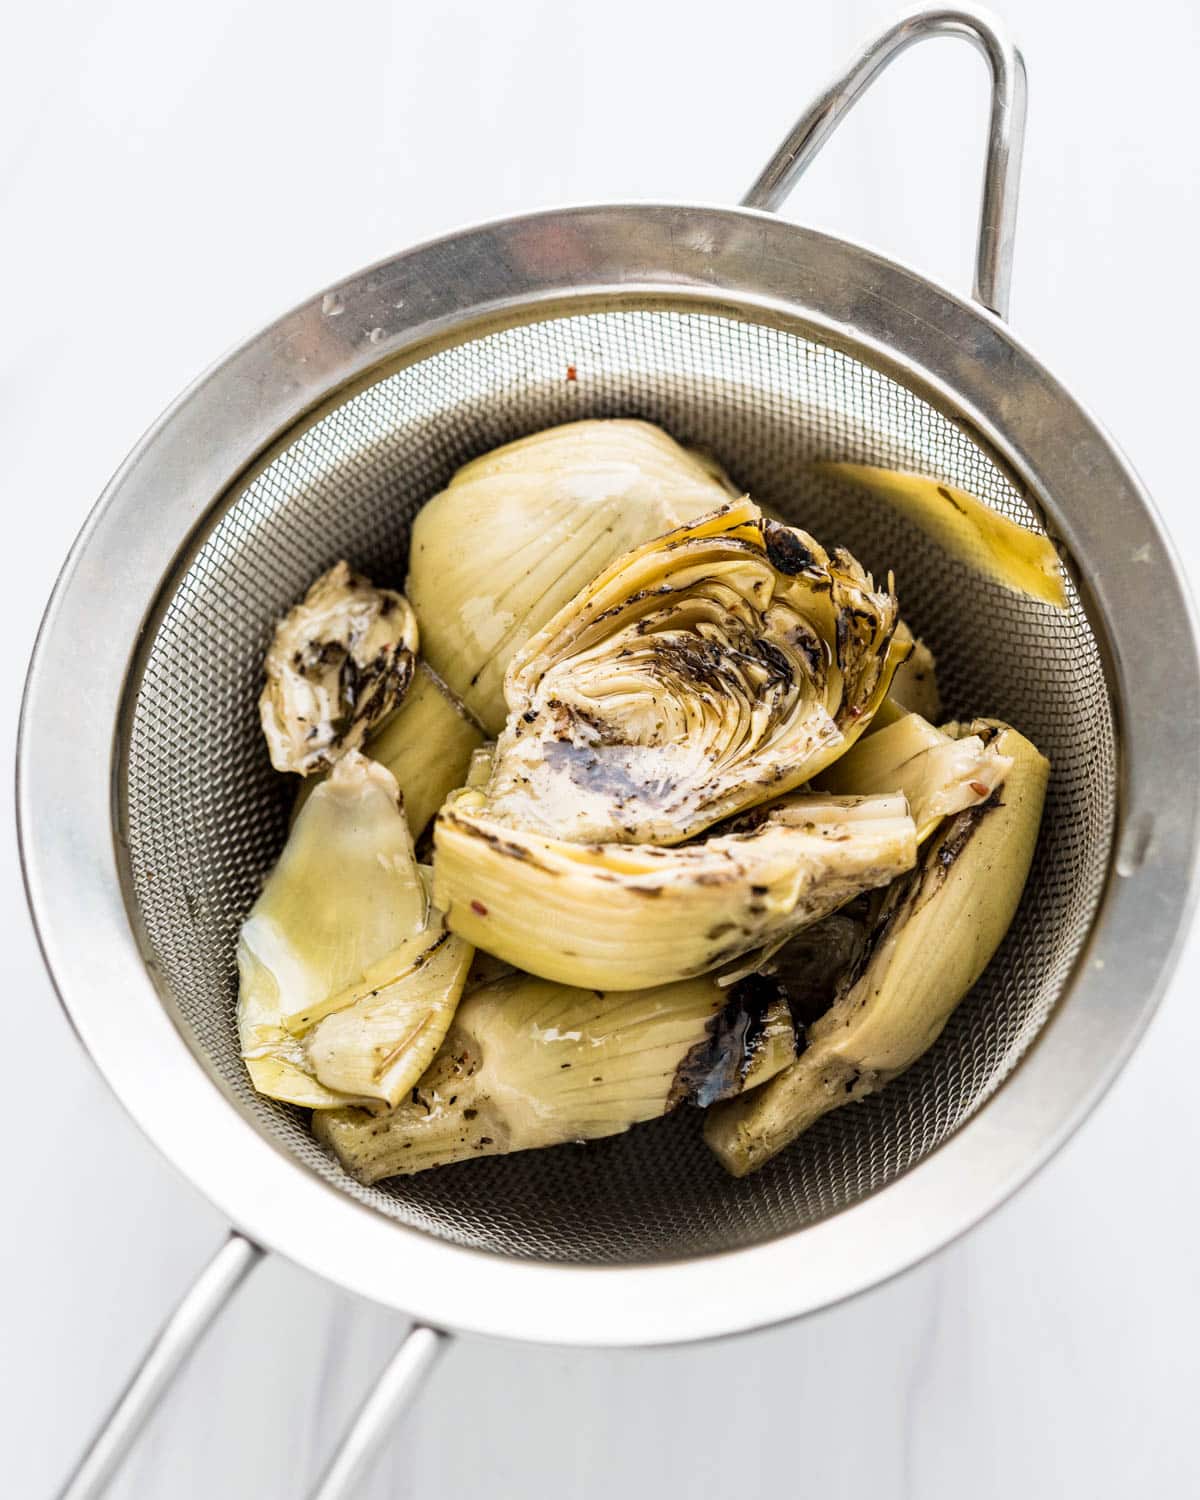 I am draining artichokes in a strainer.